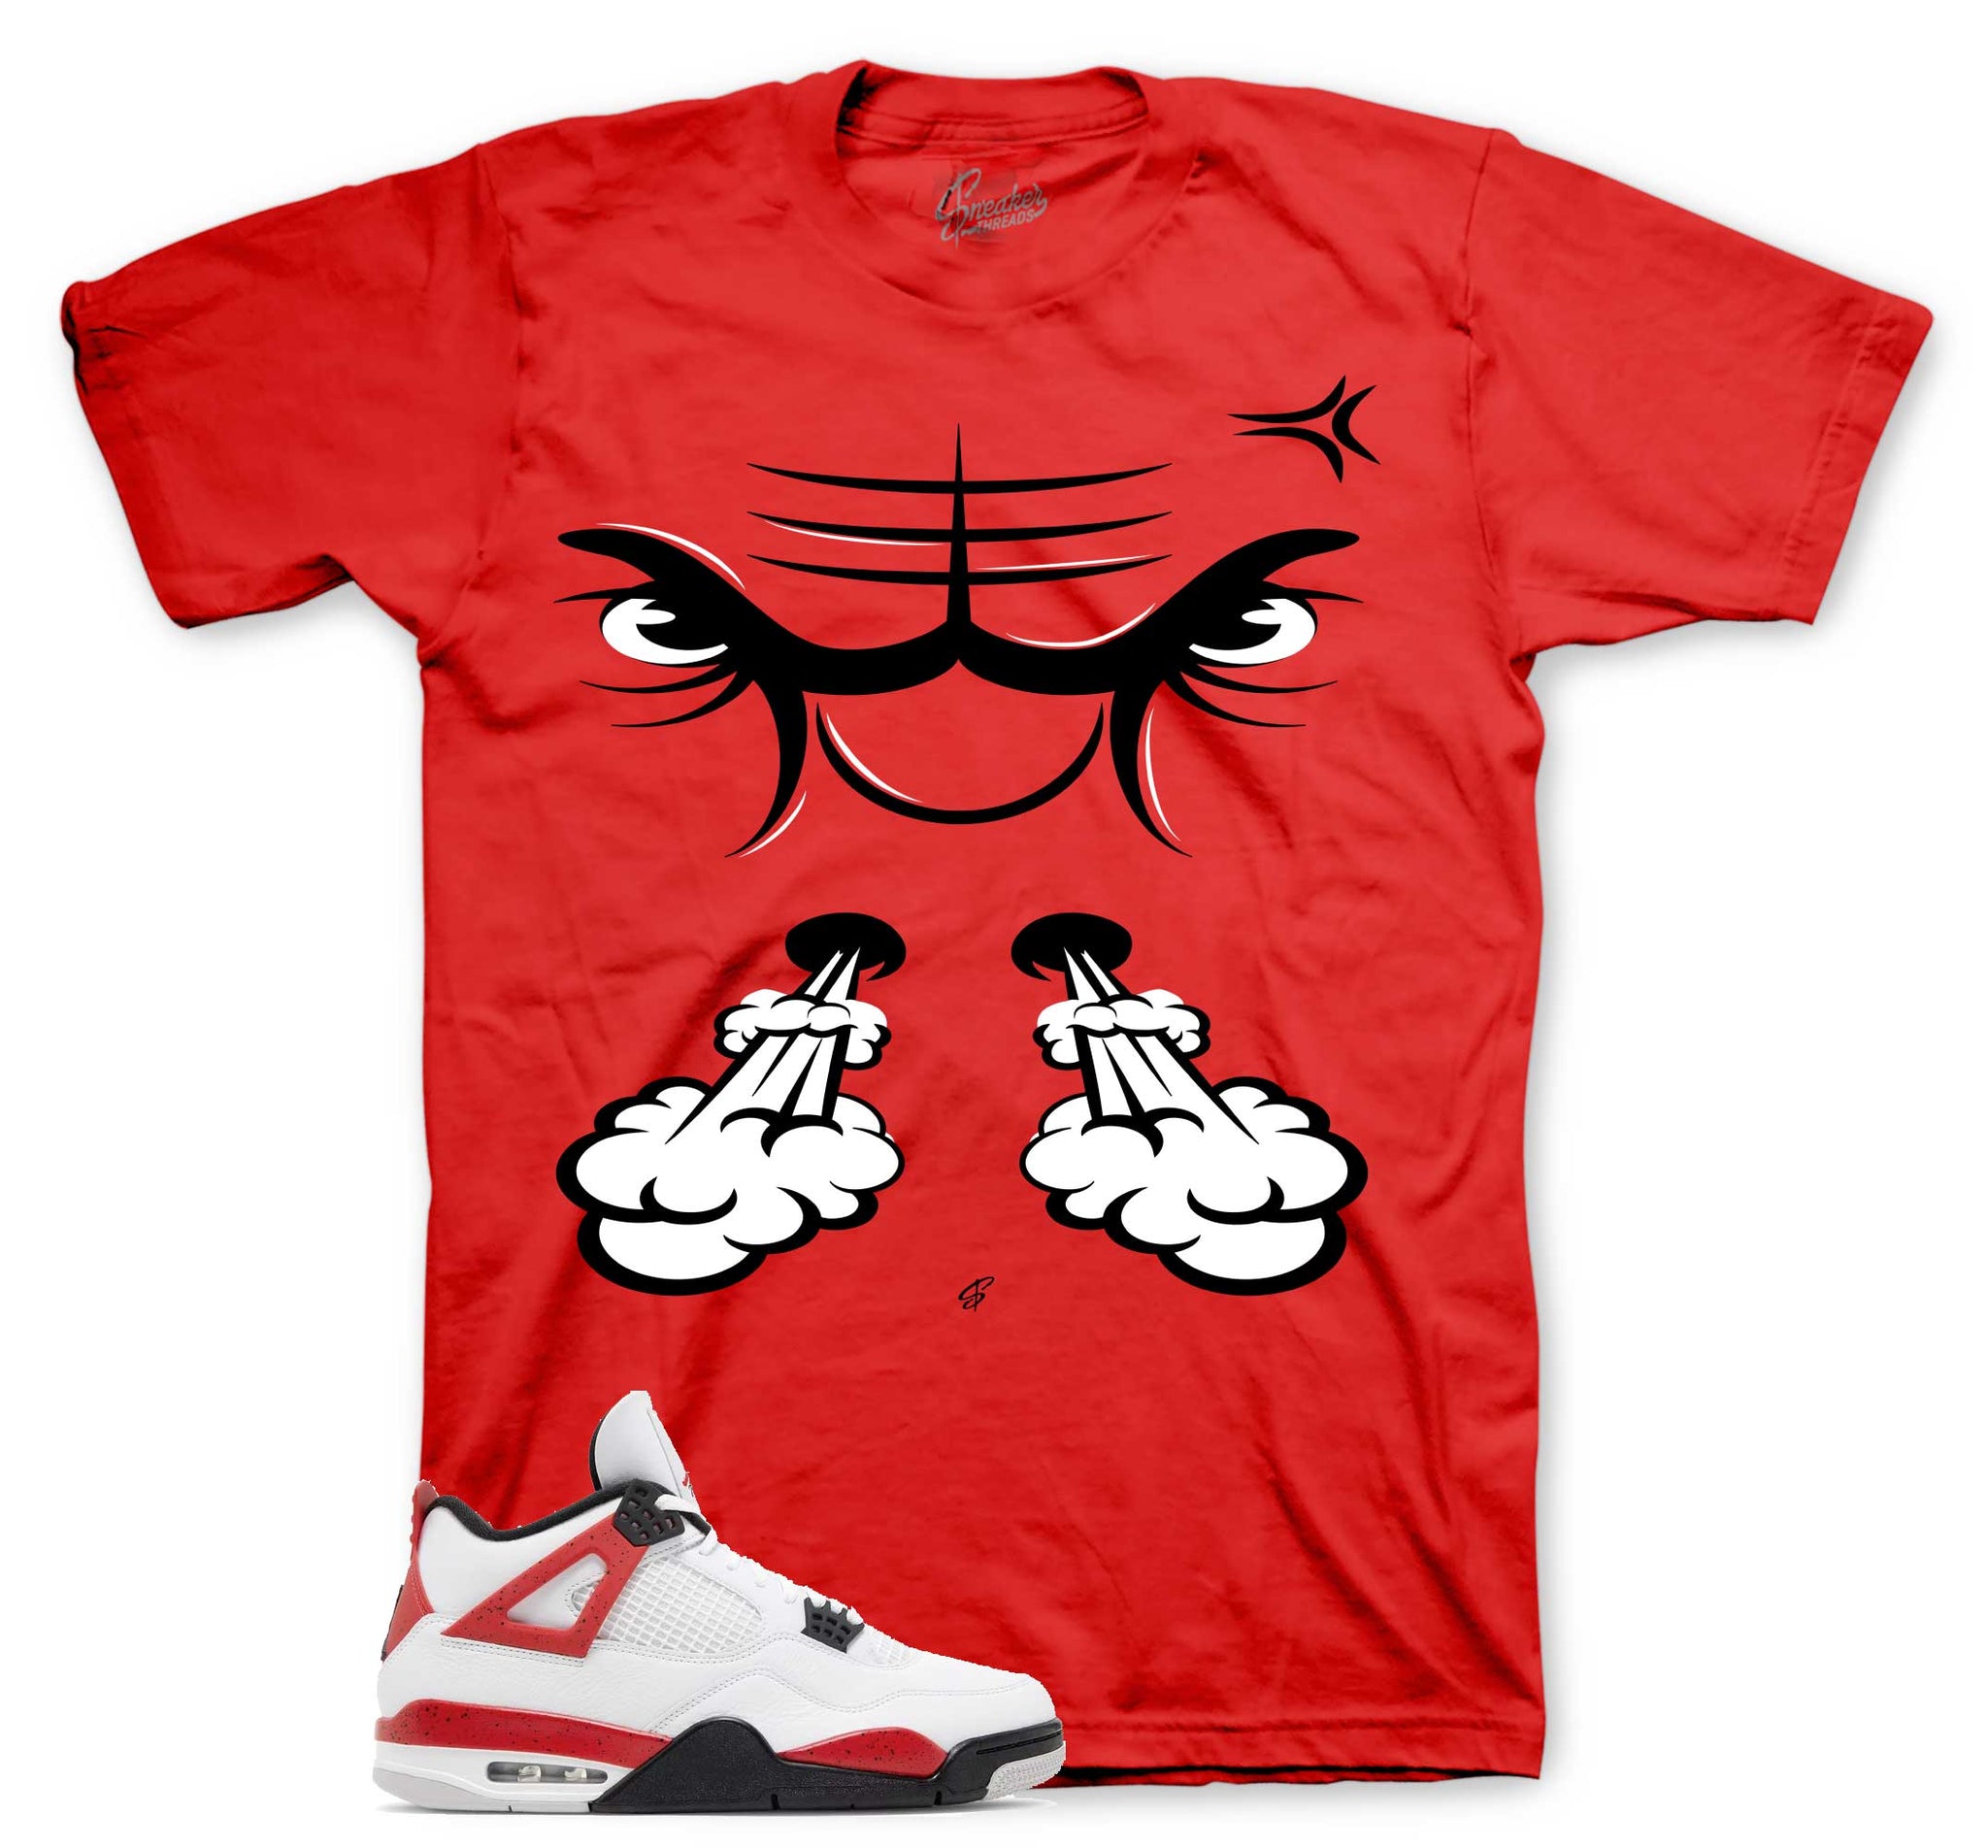 Retro 4 Red Cement Shirt - Raging Face - Red